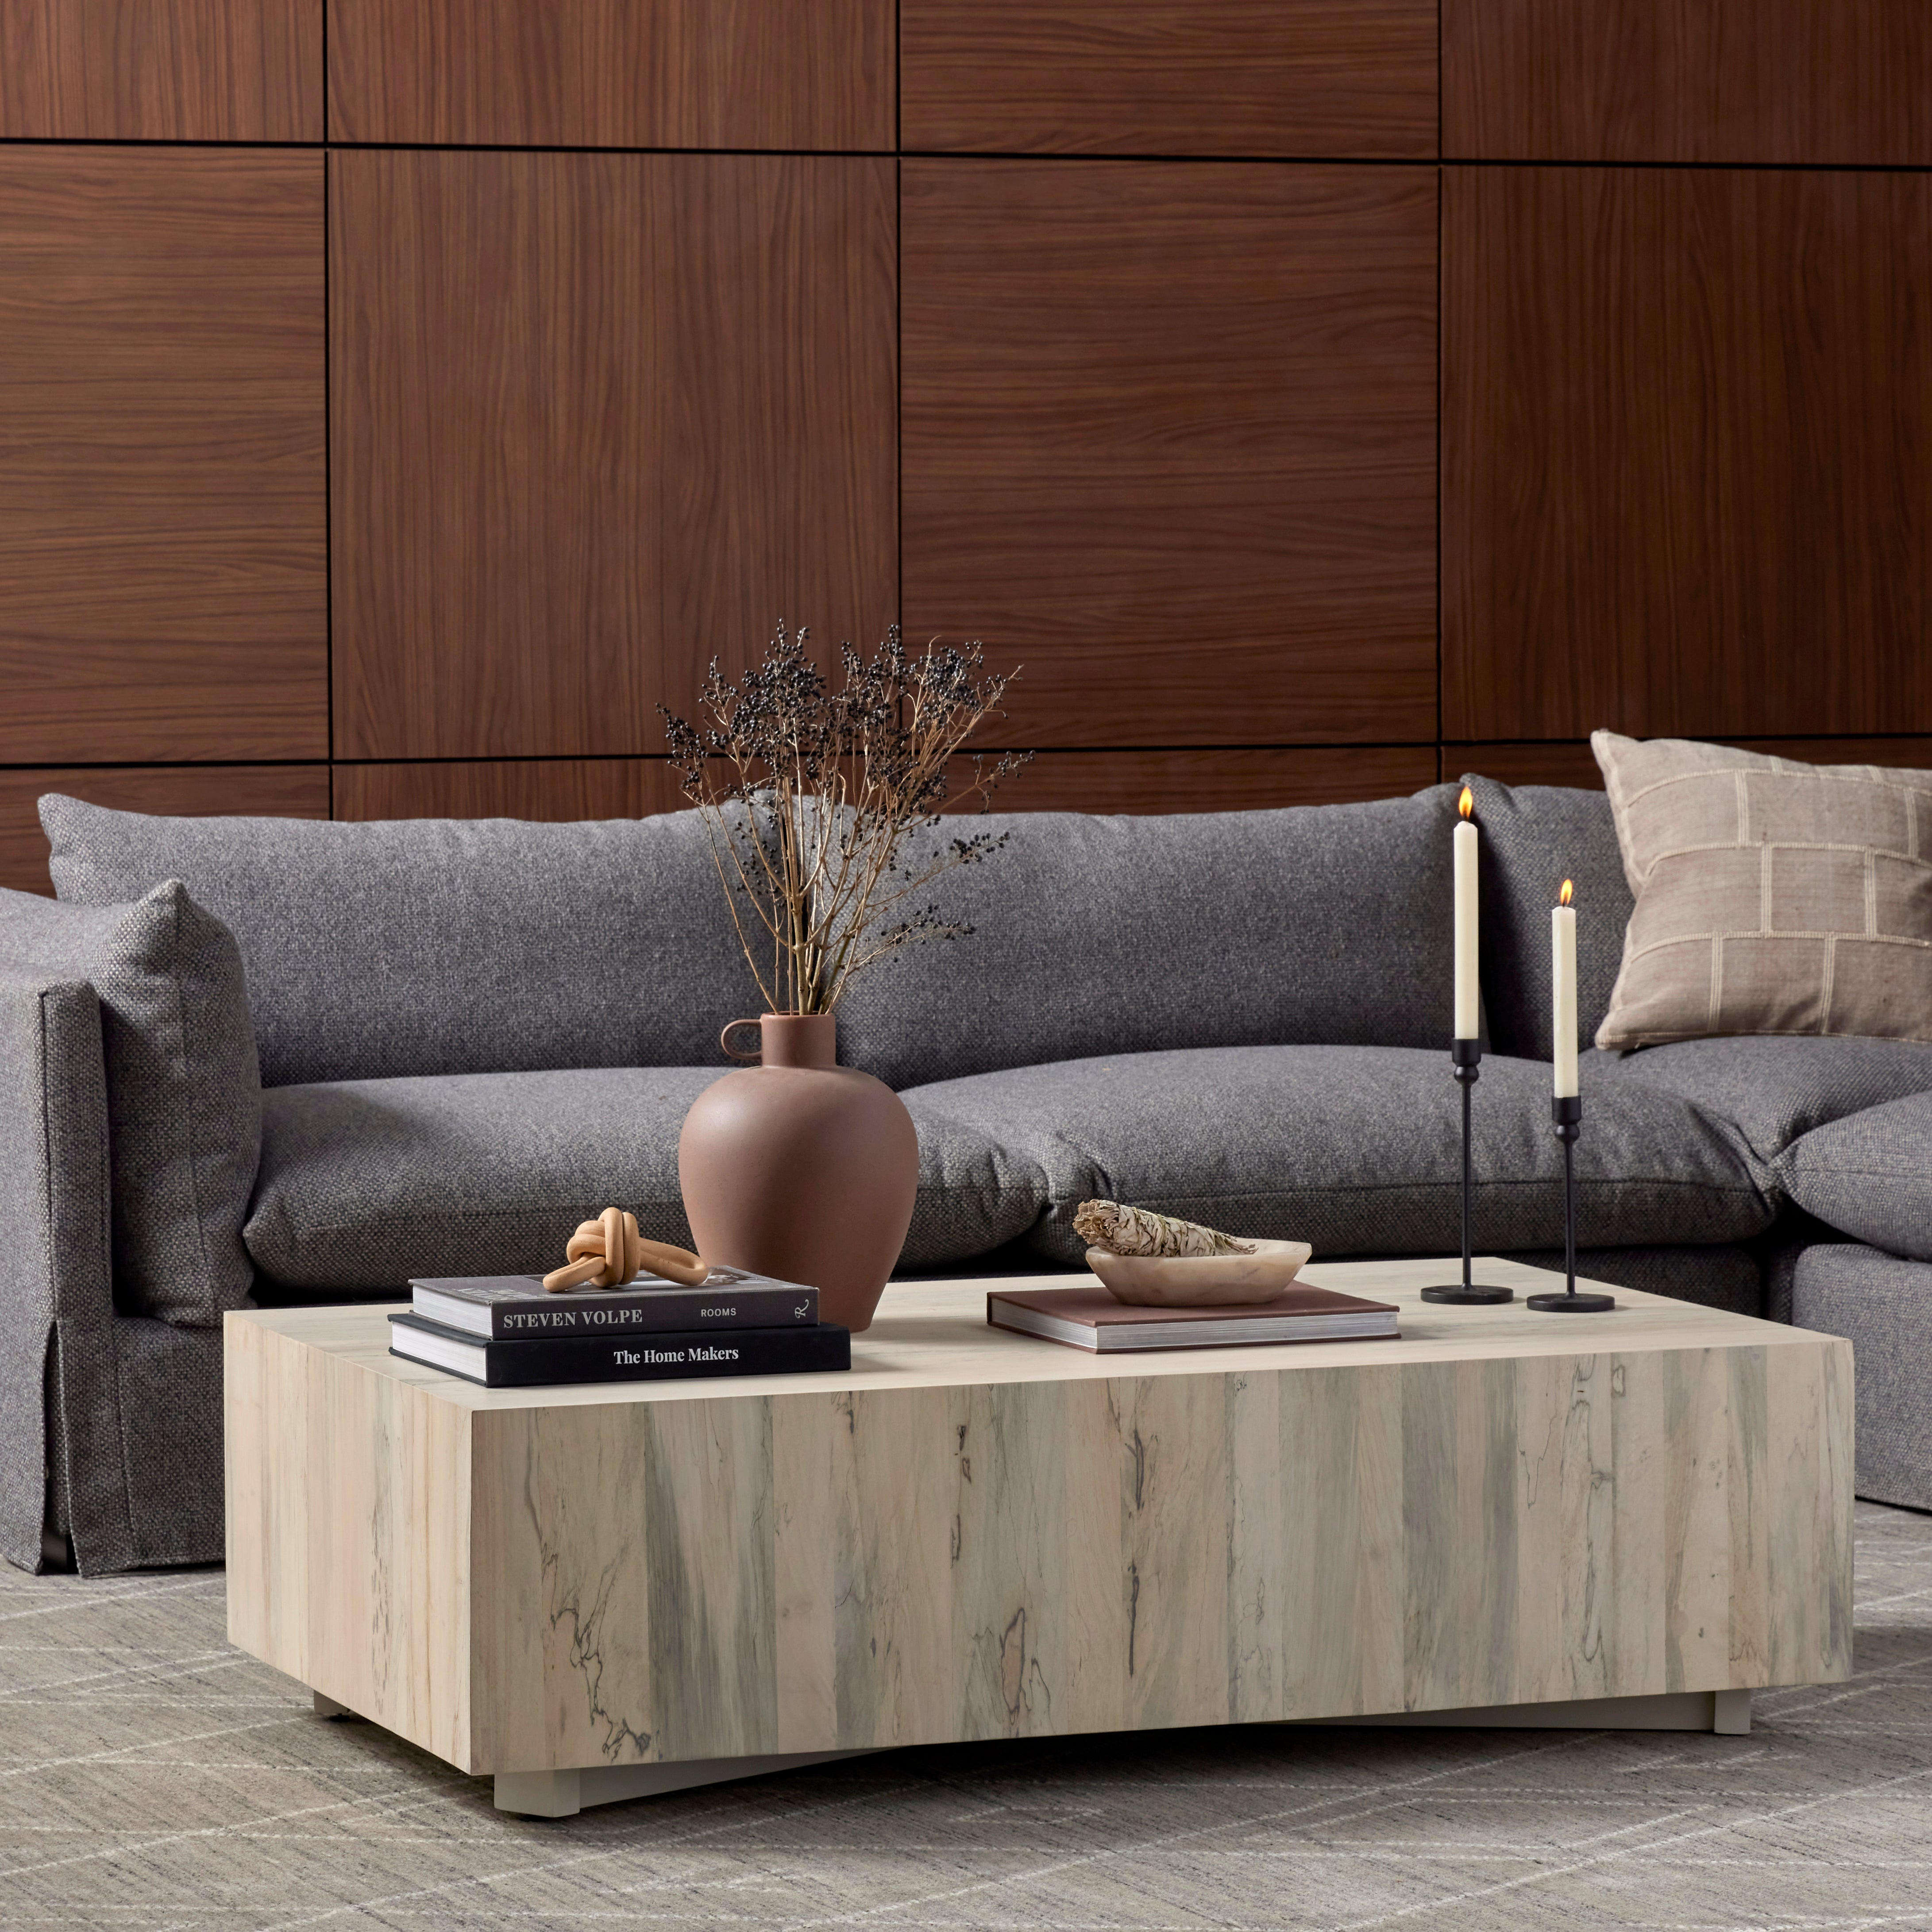 Stunning forces of nature, captured in a coffee table. Spalted primavera wood is hand-shaped into a rectangular silhouette and finished in a white hue. Reflective of woods' natural character, a slight color variance is possible from piece to piece. Amethyst Home provides interior design, new construction, custom furniture, and area rugs in the Miami metro area.